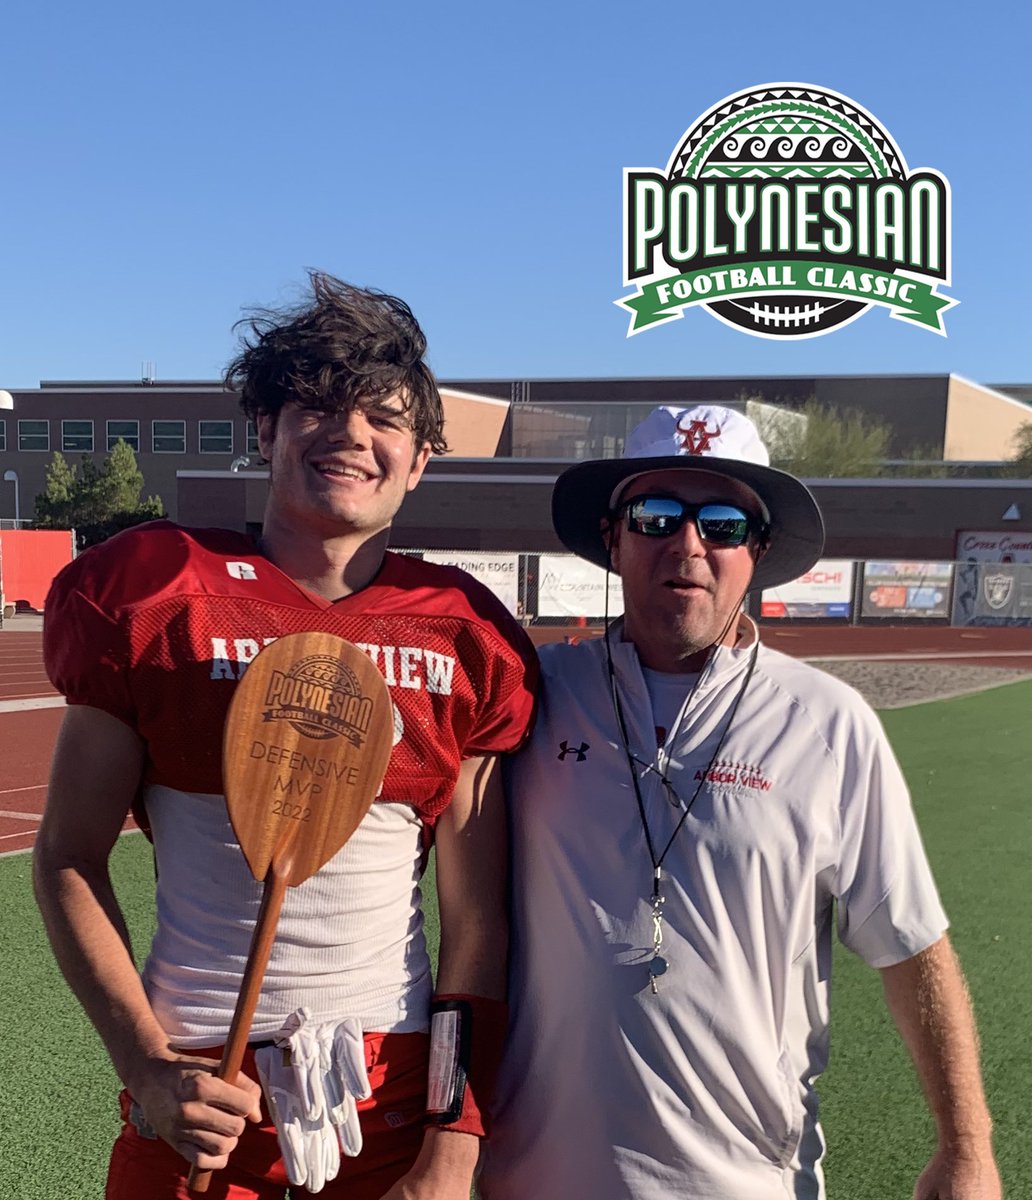 Congratulations to 2022 Polynesian Football Classic Defensive MVP CHRISTIAN THATCHER from Arbor View! The LB had 14 tackles (10 solo) and 3 TFL in the Aggies 45-16 win over Mountain Pointe!